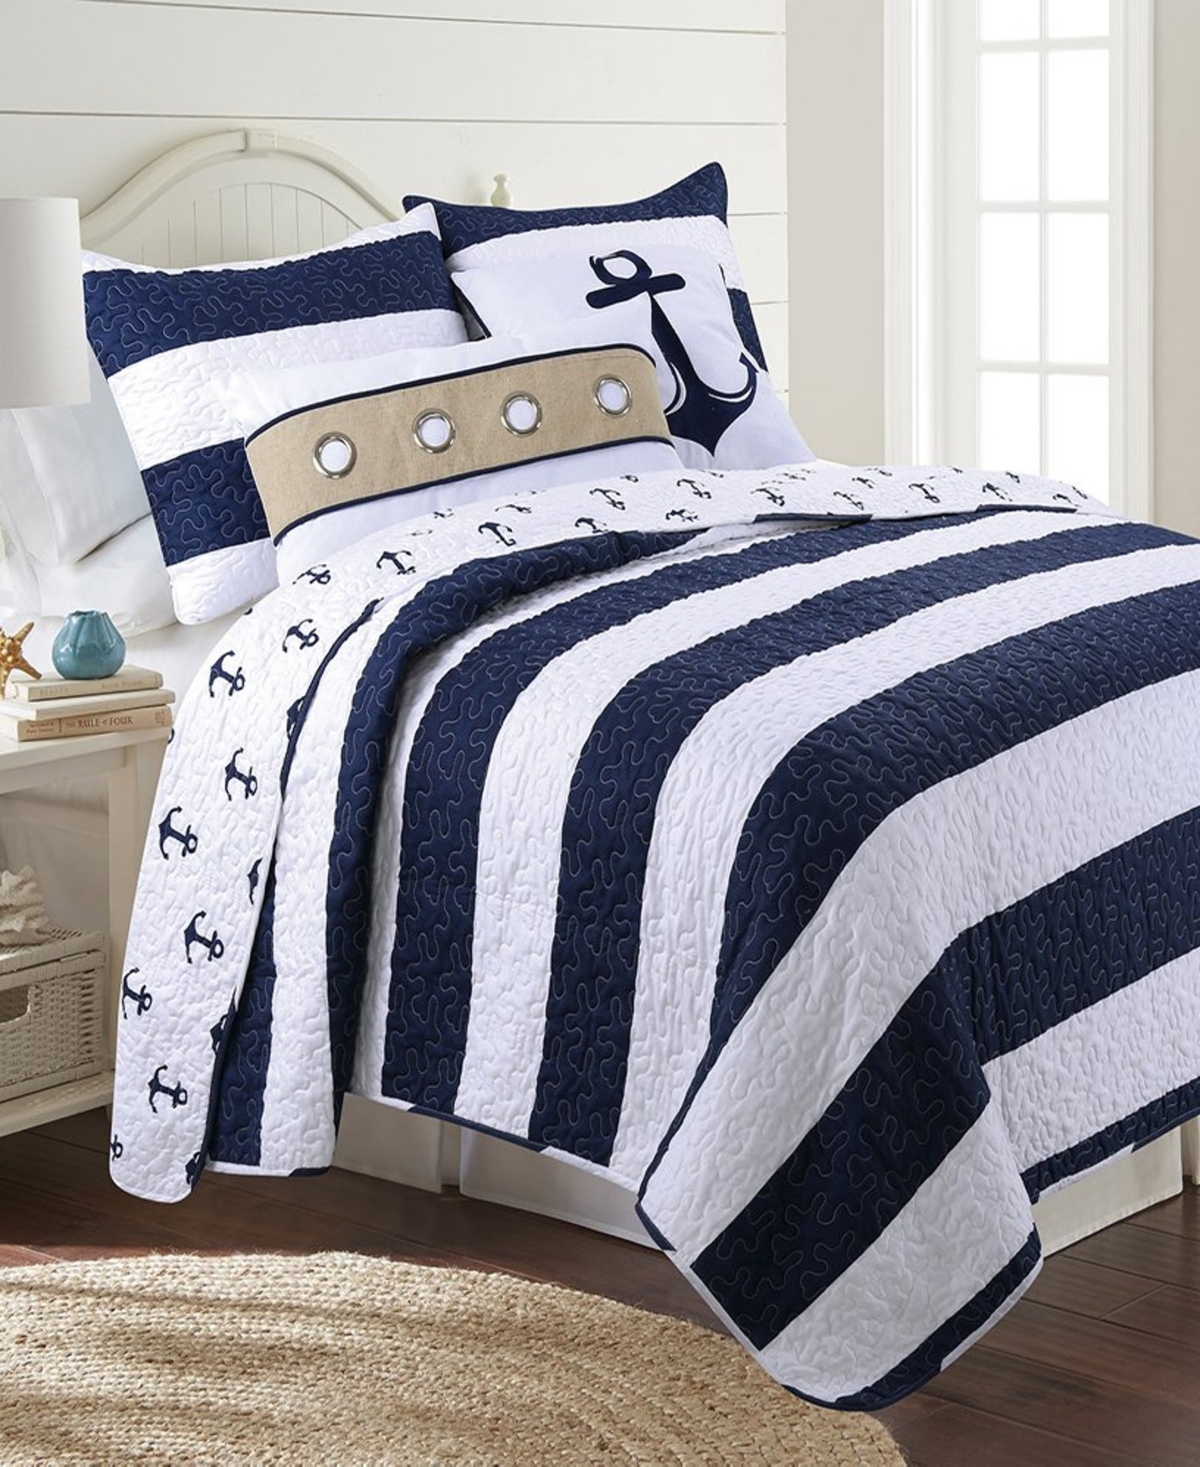 Elise And James Home Hallie Nautical Reversible 3-piece Quilt Set, King In Navy